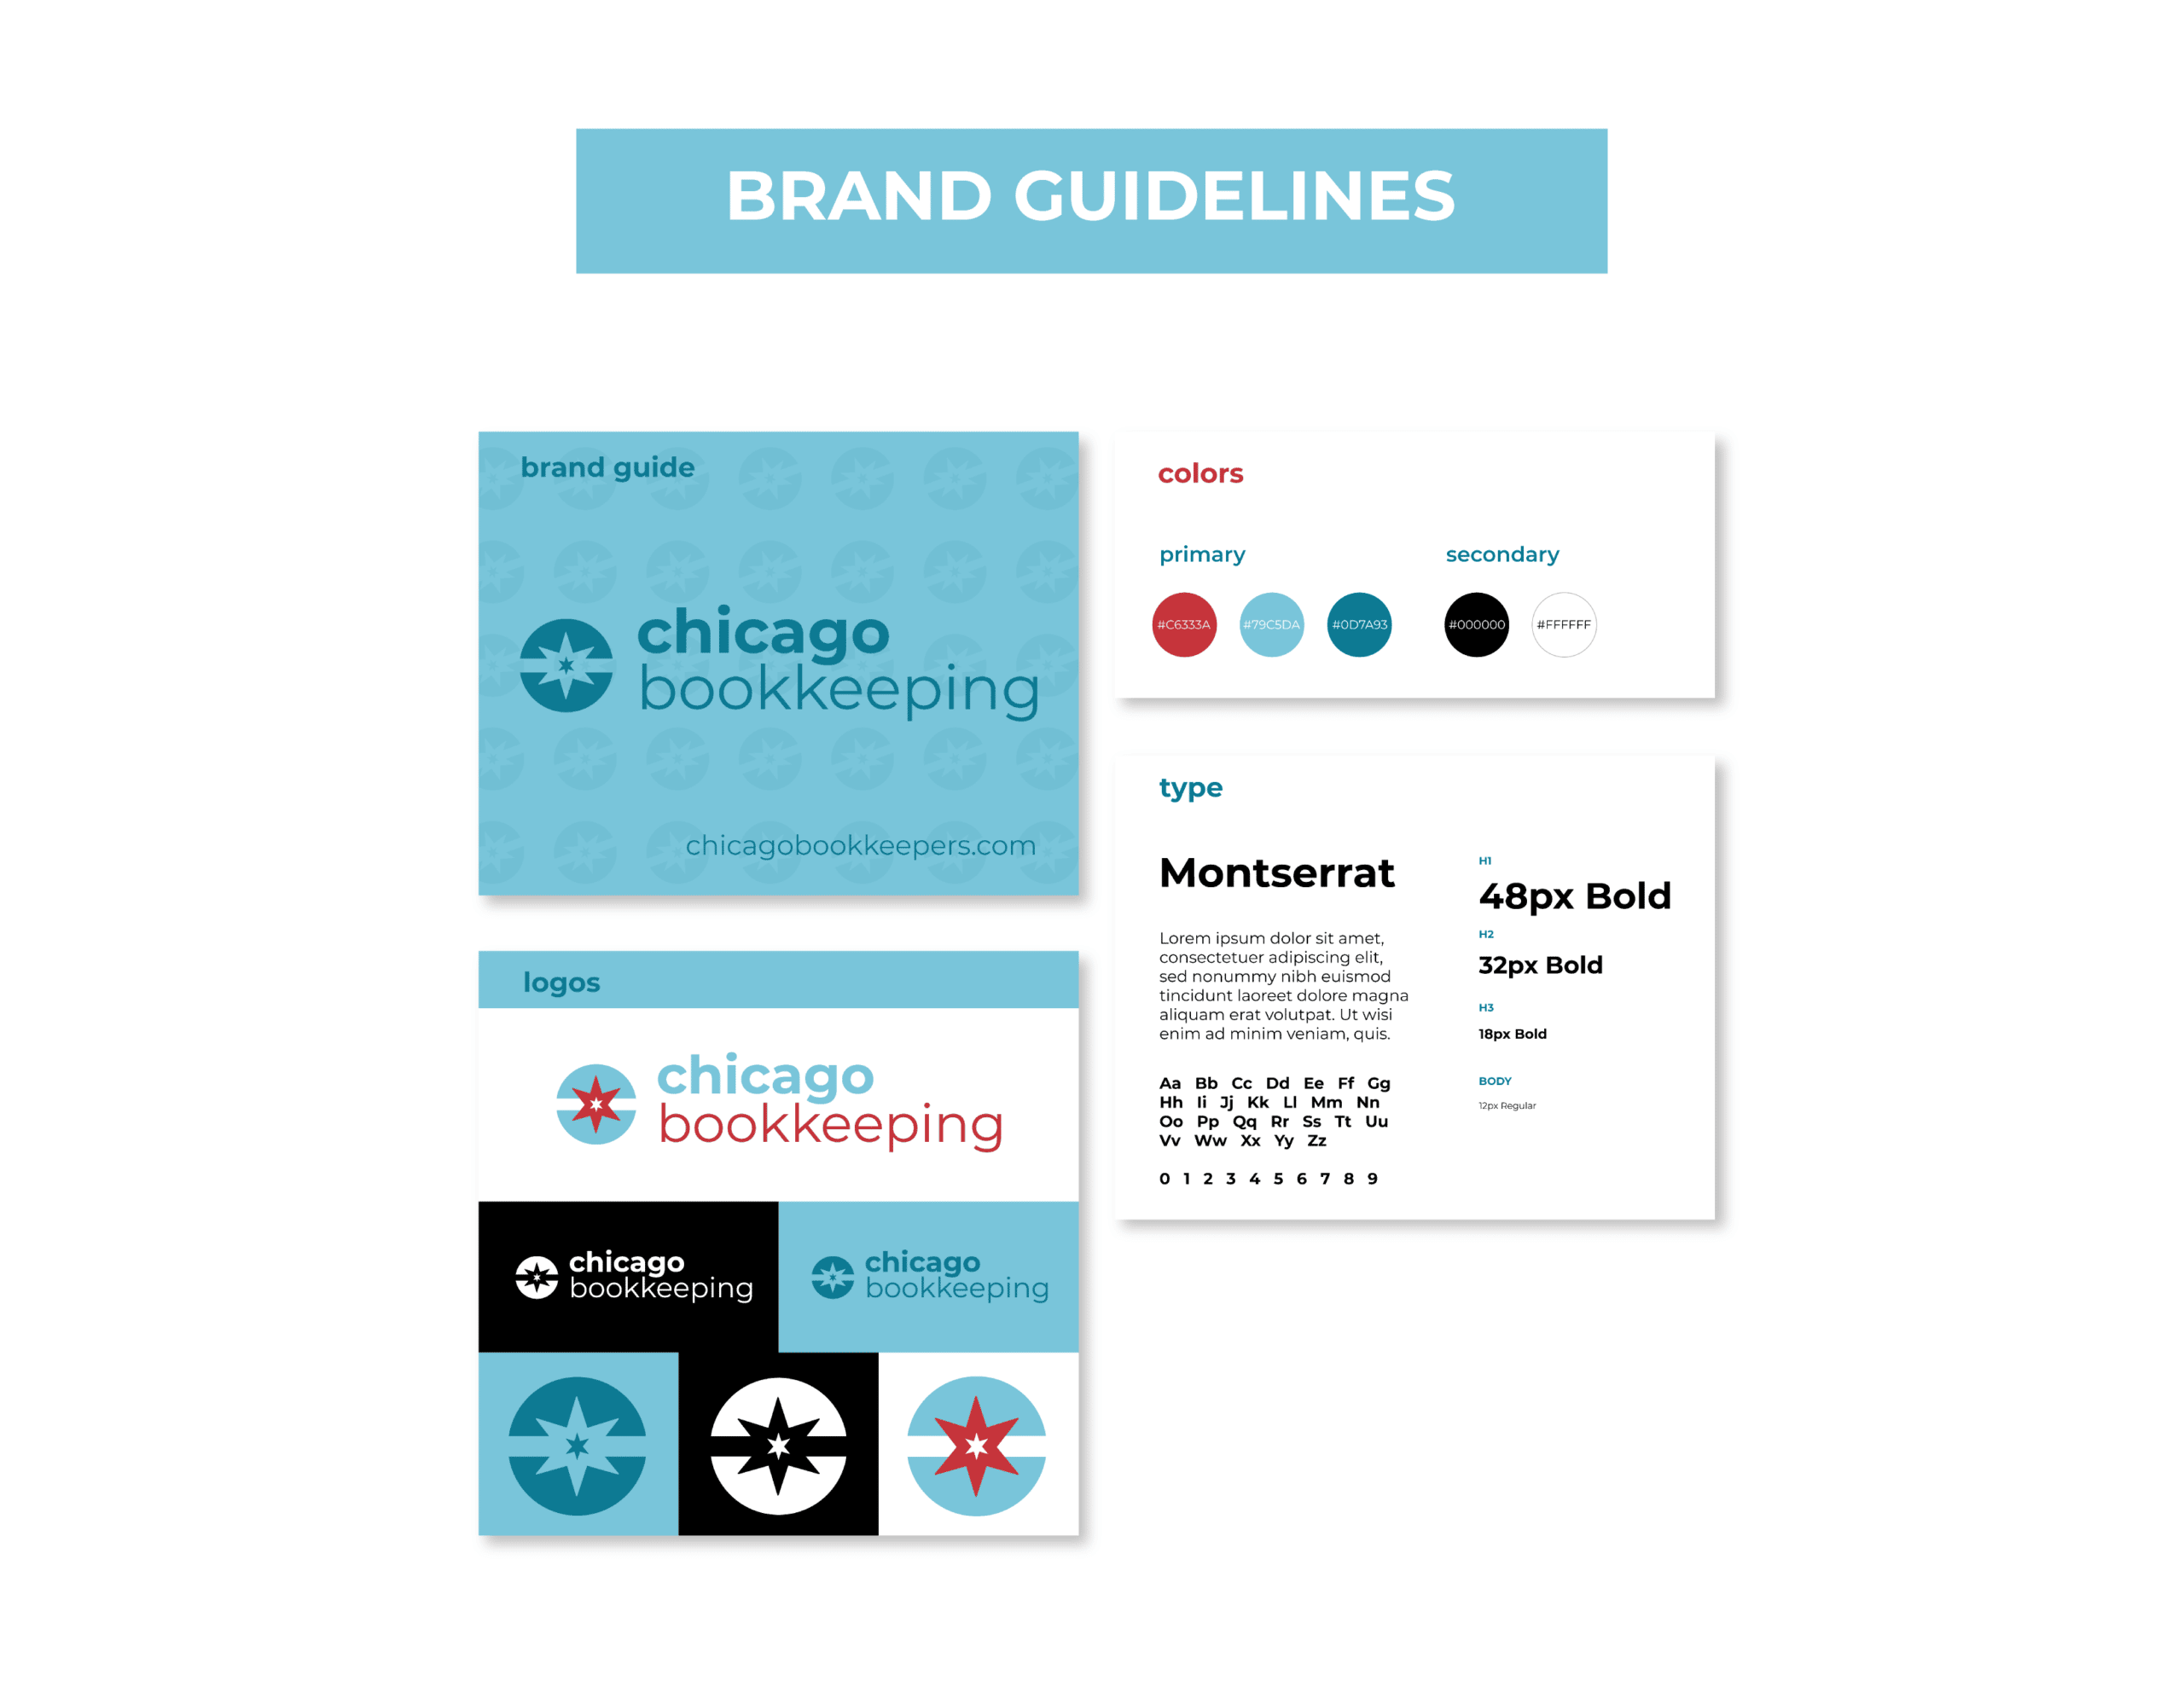 03Chicago_Bookkeeping__Branding Guidelines